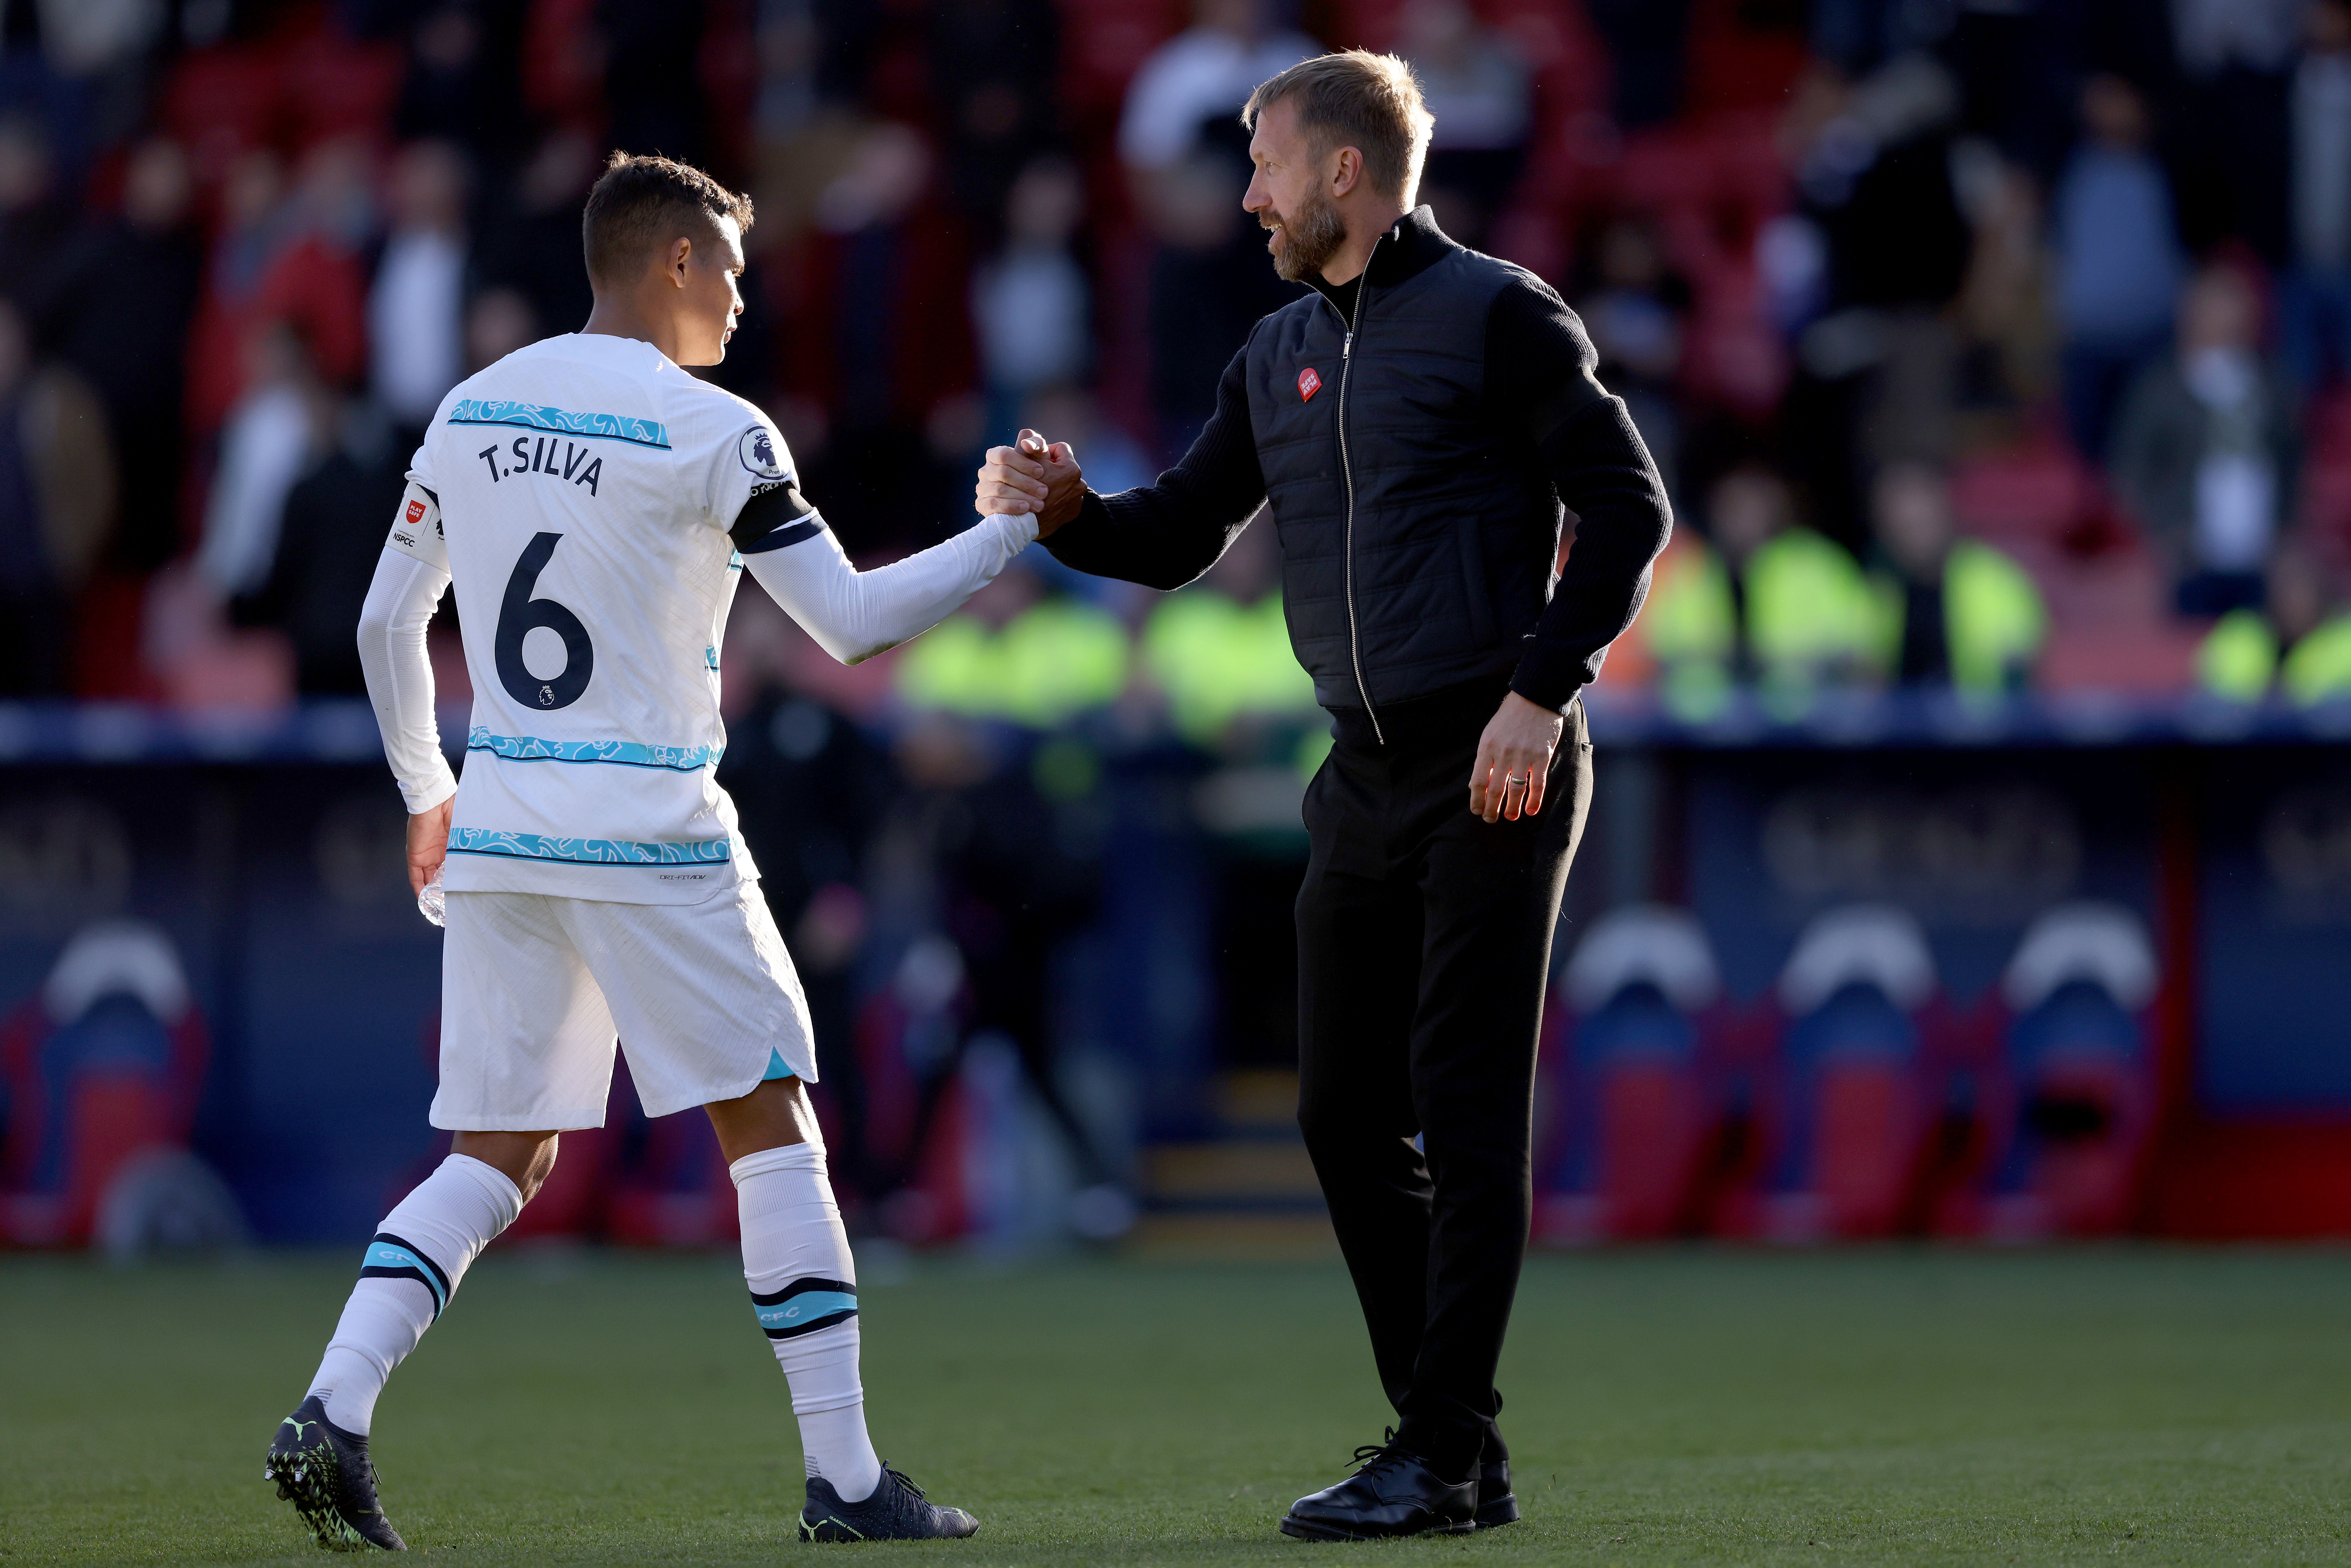 Graham Potter, Manager of Chelsea shakes hands with Thiago Silva following their side's victory in the Premier League match between Crystal Palace and Chelsea FC at Selhurst Park on October 01, 2022 in London, England.